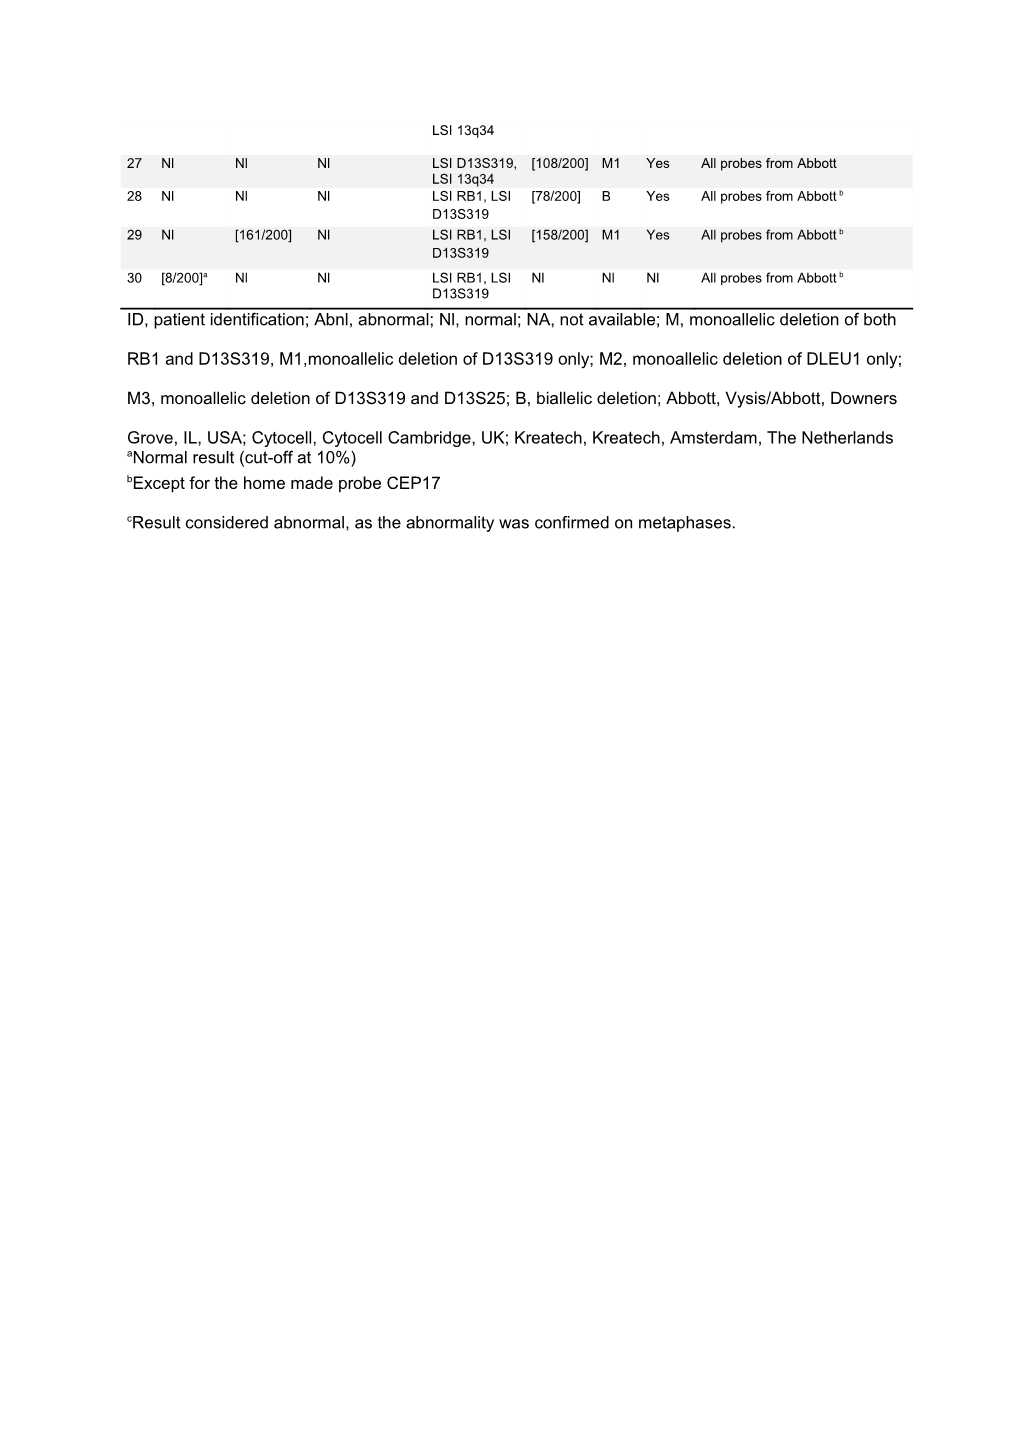 Supplementary Table 4B FISH Results for CCND1 in Cases with PLL